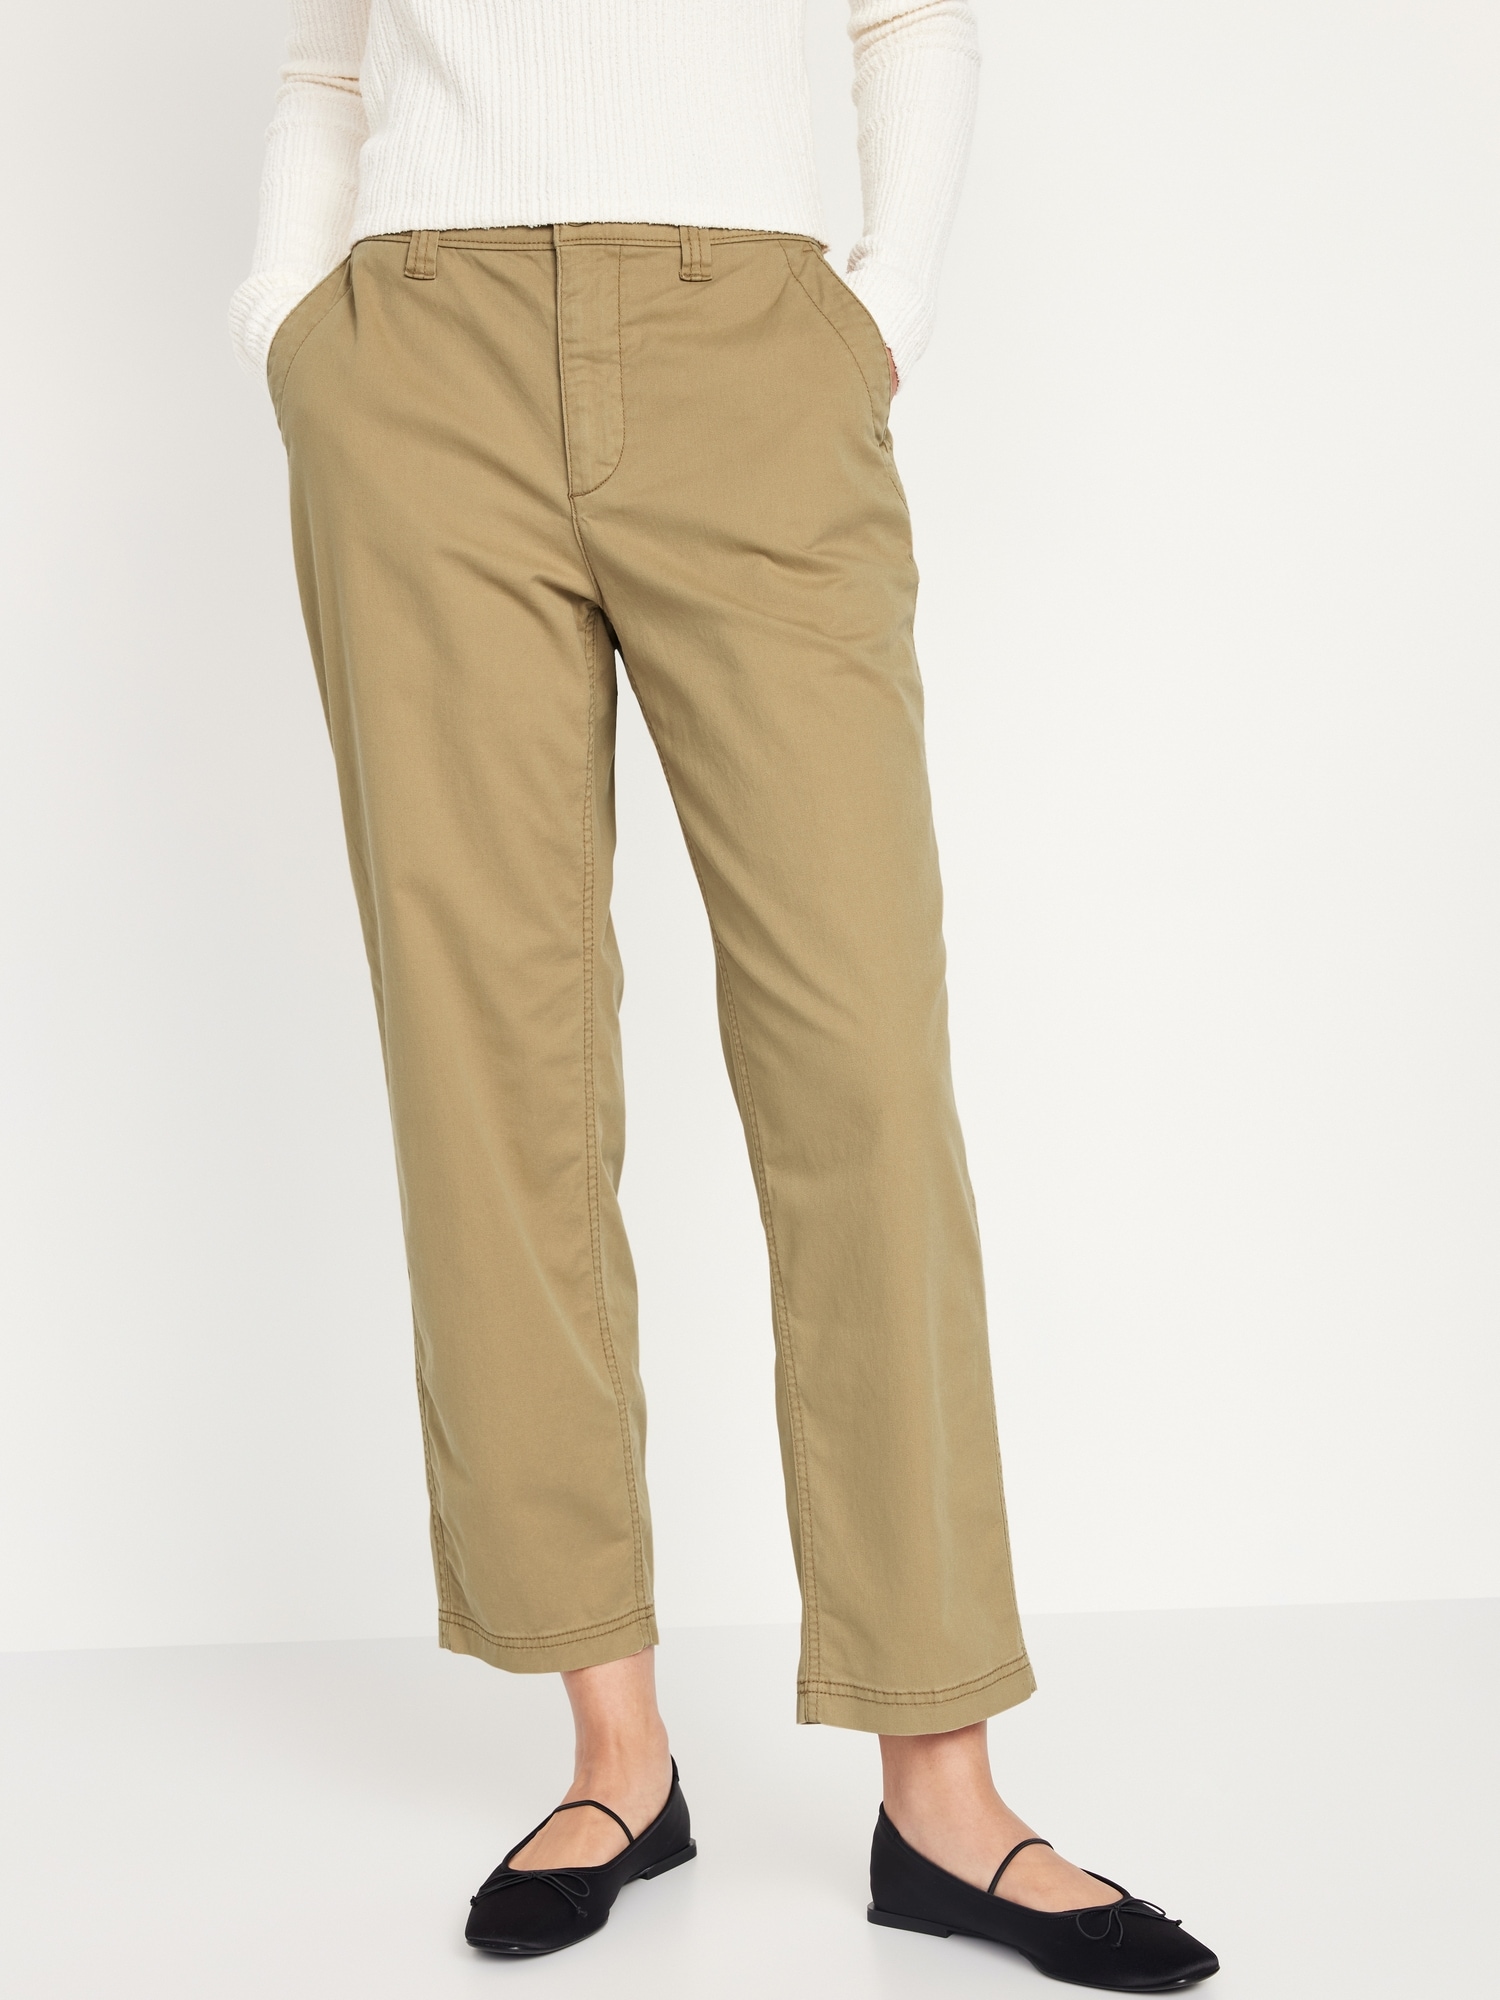 Pants for Women | Cato Fashions